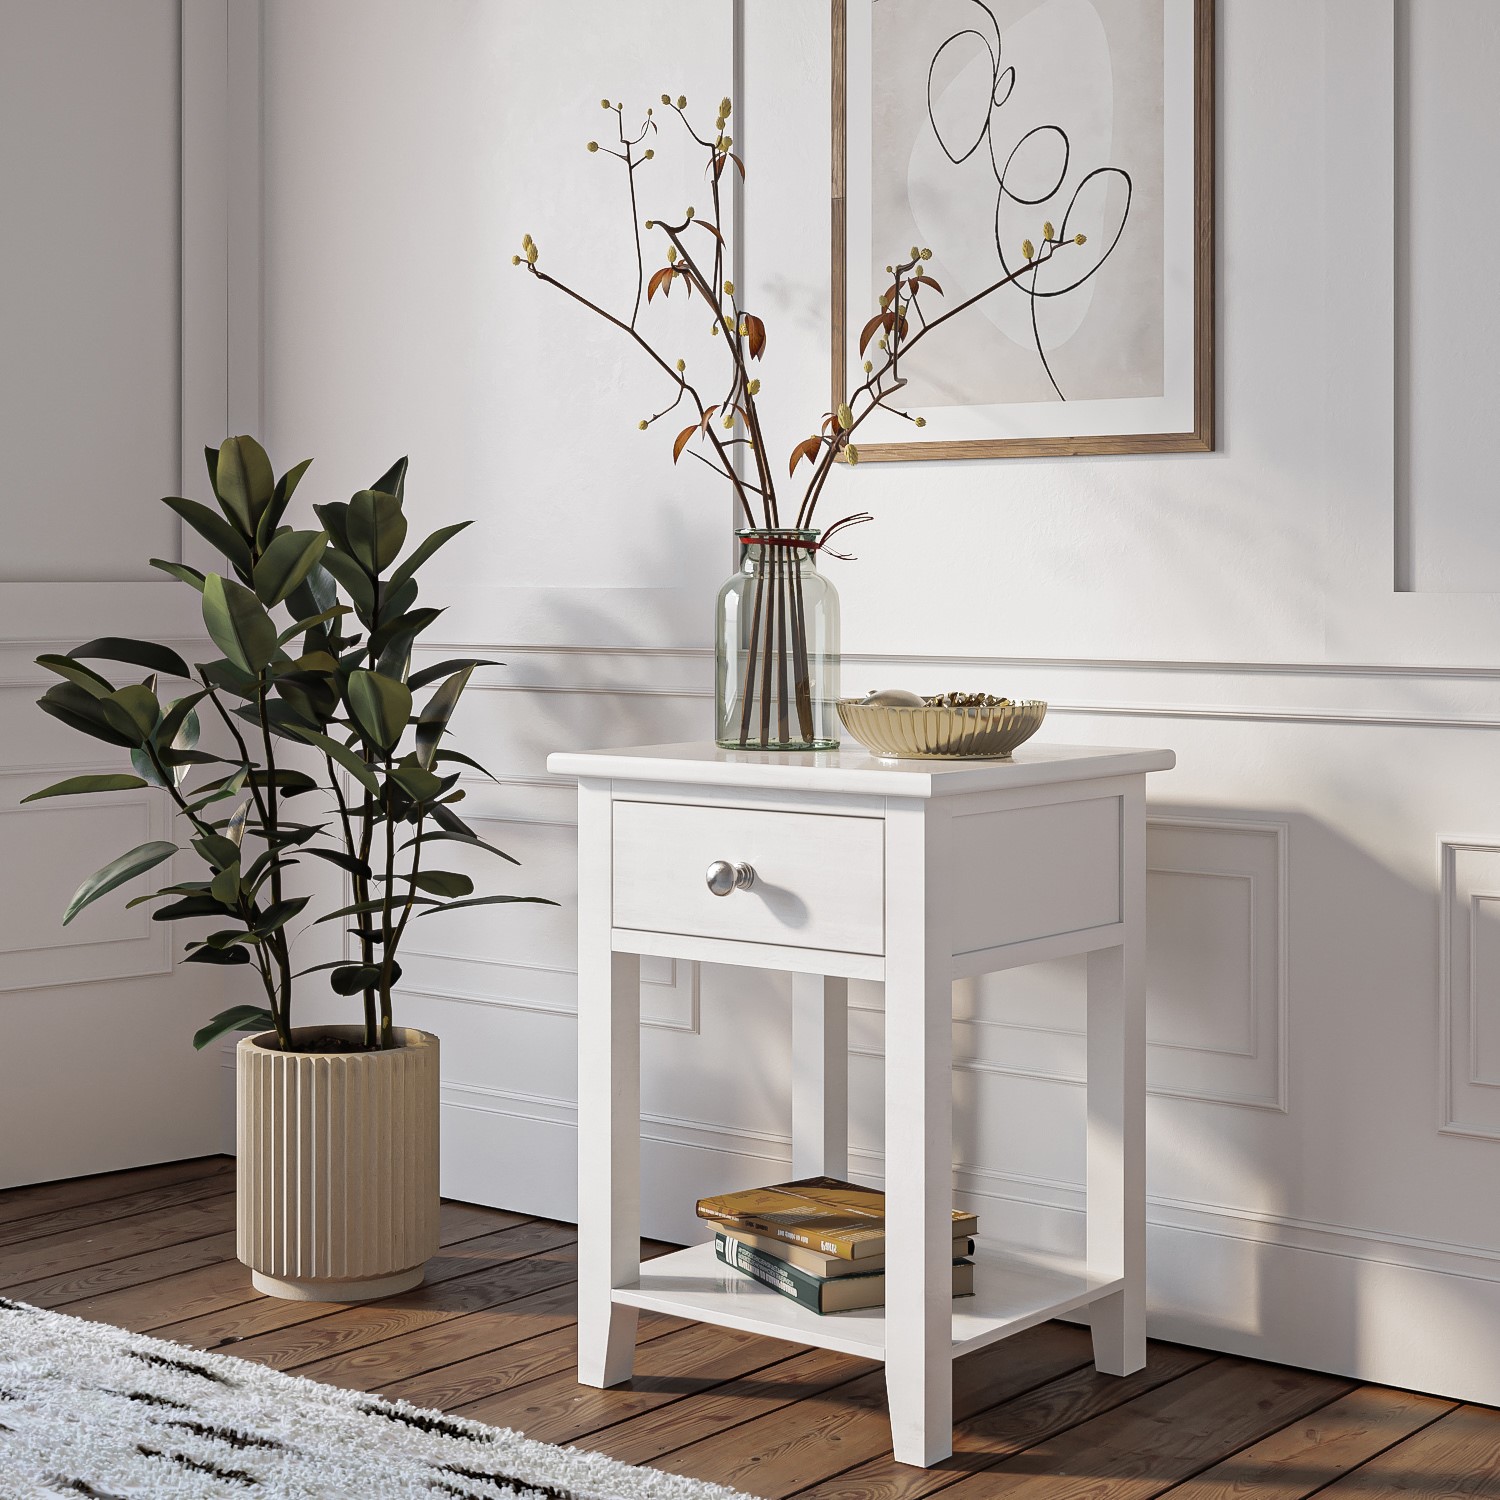 Photo of White painted bedside table with drawer - harper